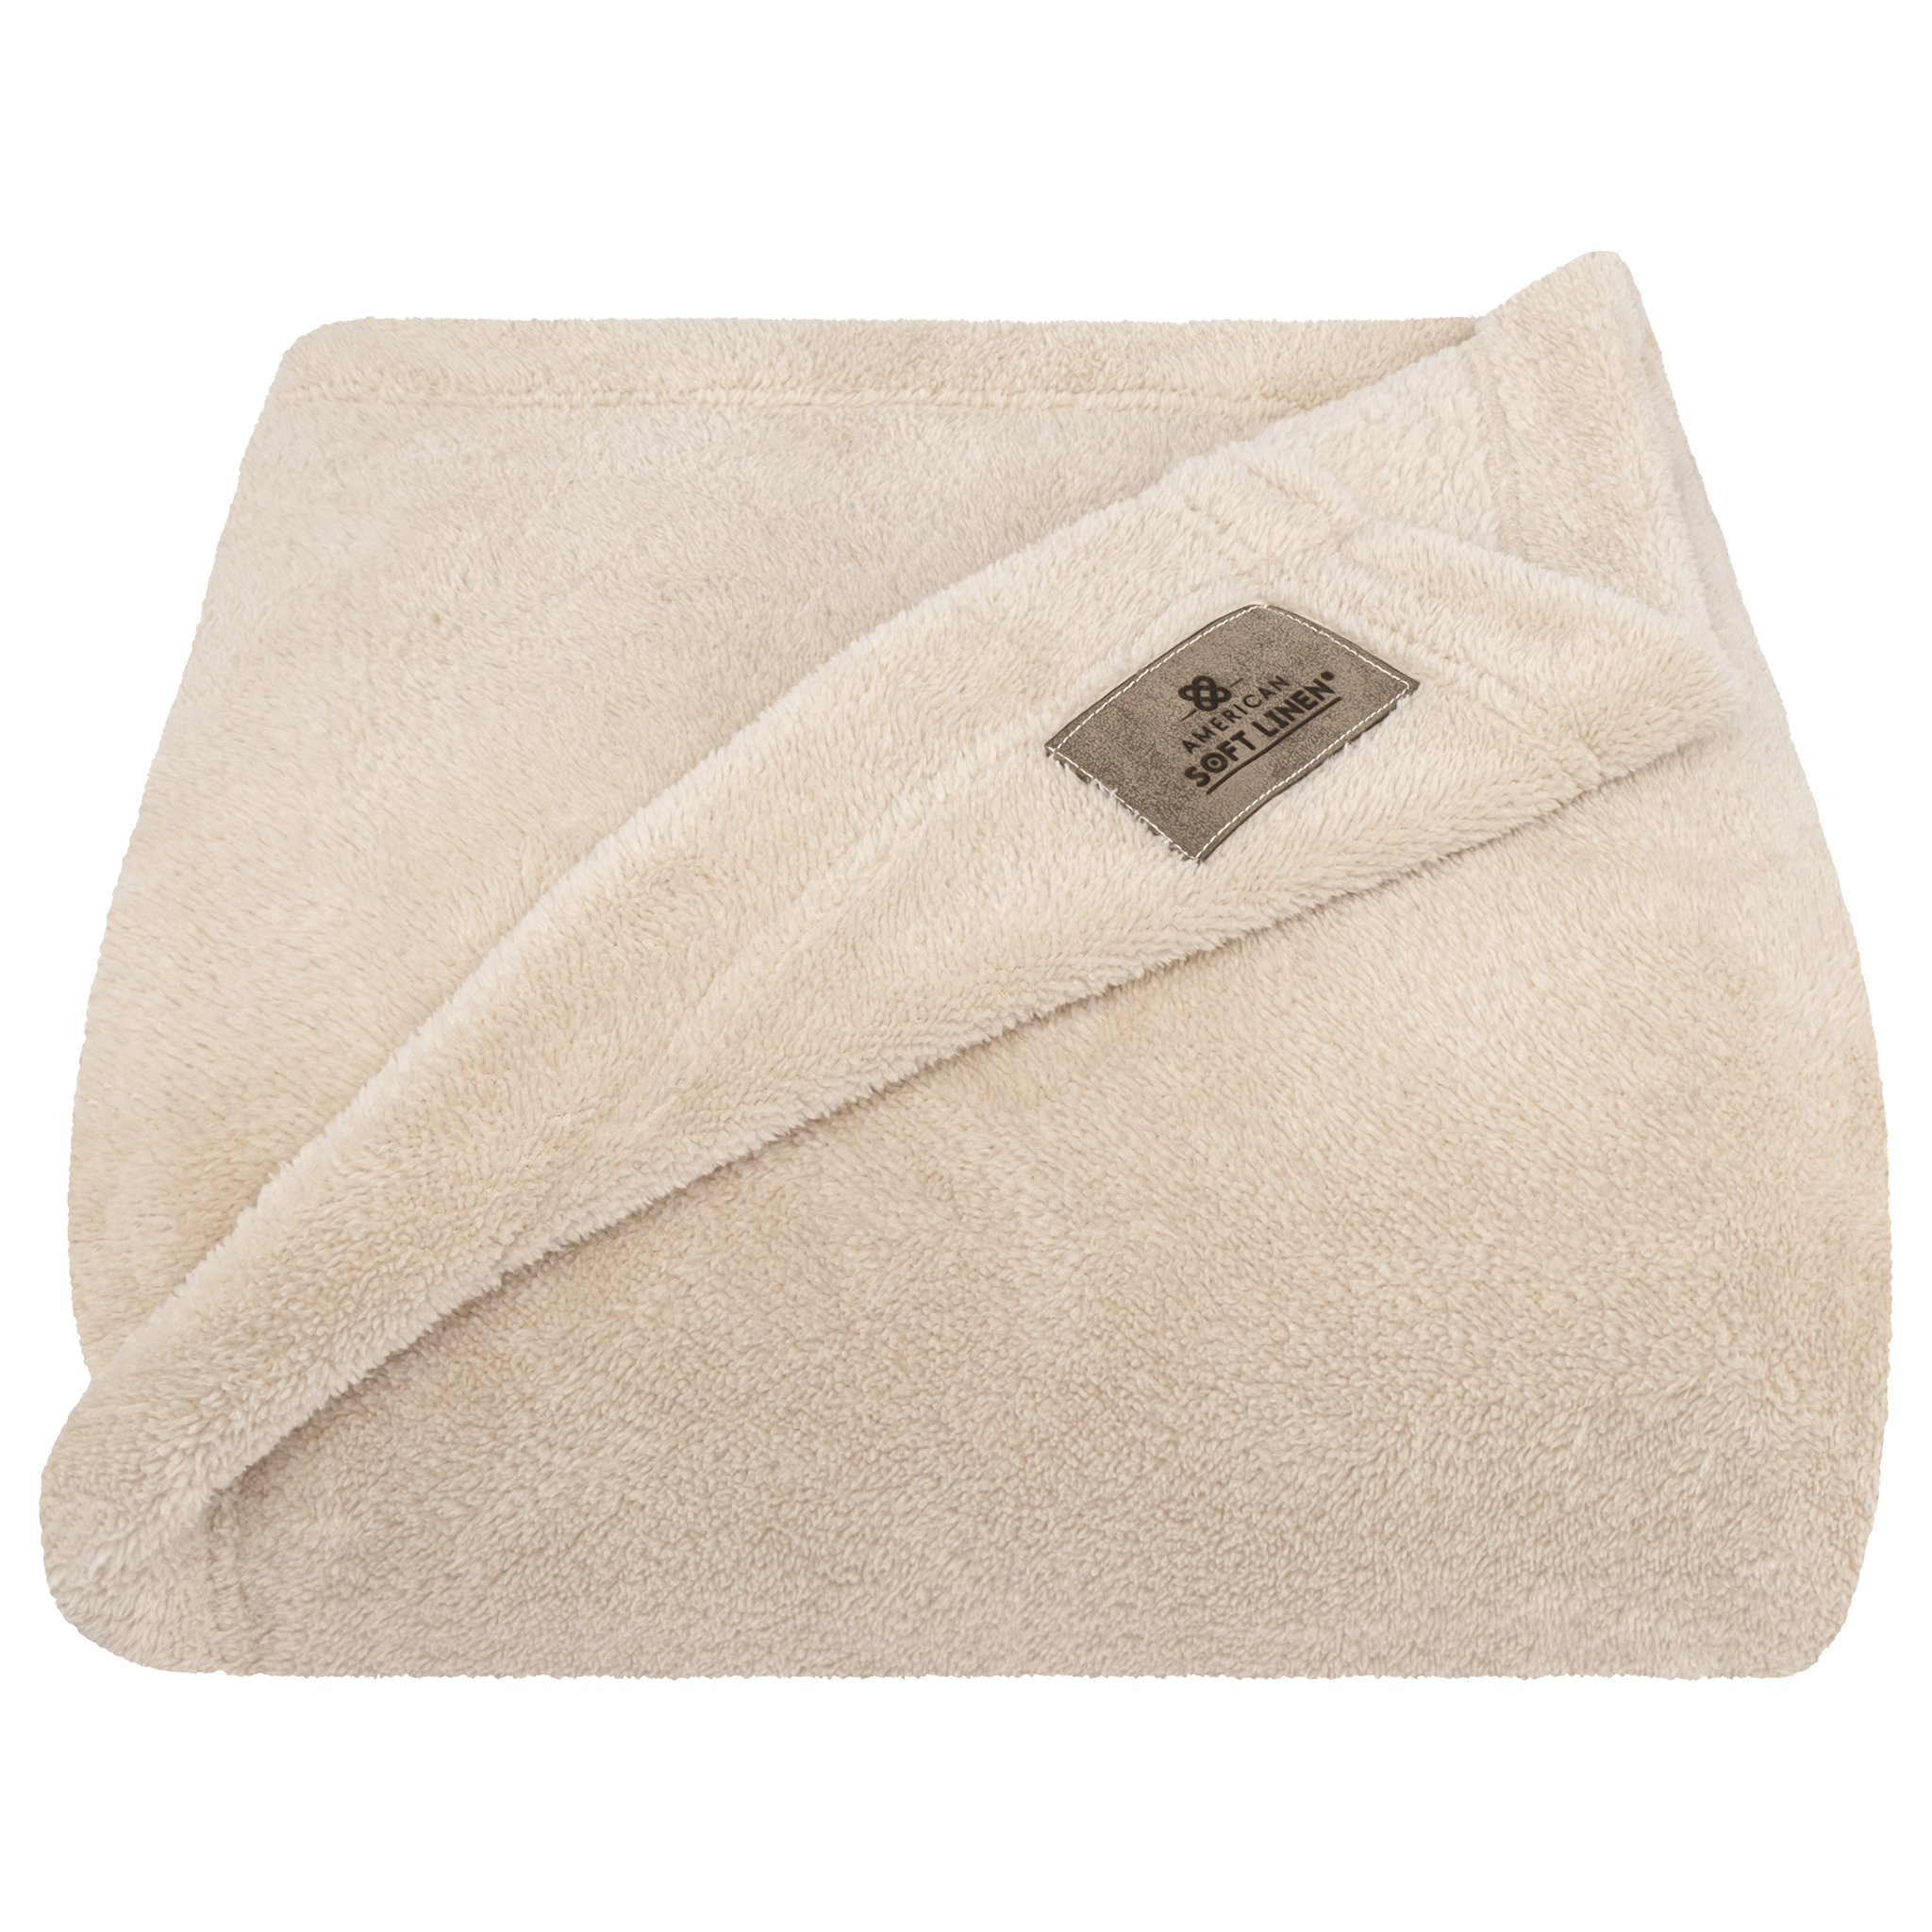 American Soft Linen - Bedding Fleece Blanket - Wholesale - 15 Set Case Pack - Twin Size 60x80 inches - Sand-Taupe - 3